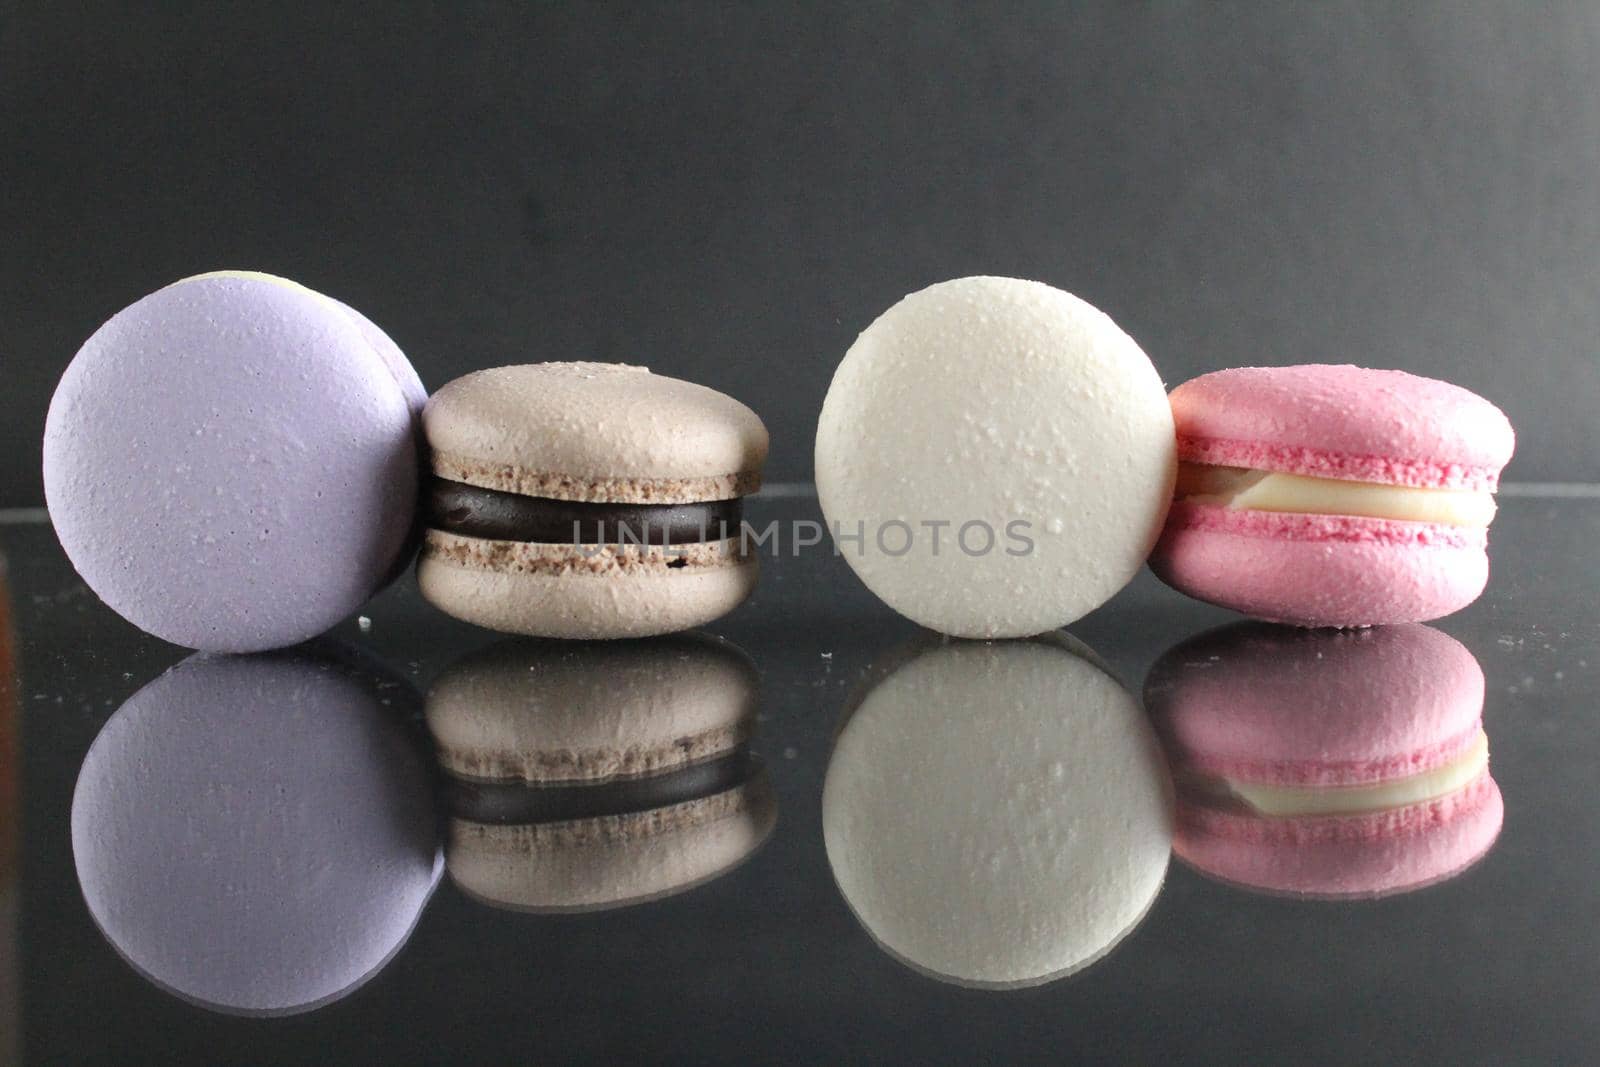 Four cakes blue purple pink coffee white macarons lie on a mirrored surface and are reflected on a black background with a place for text.